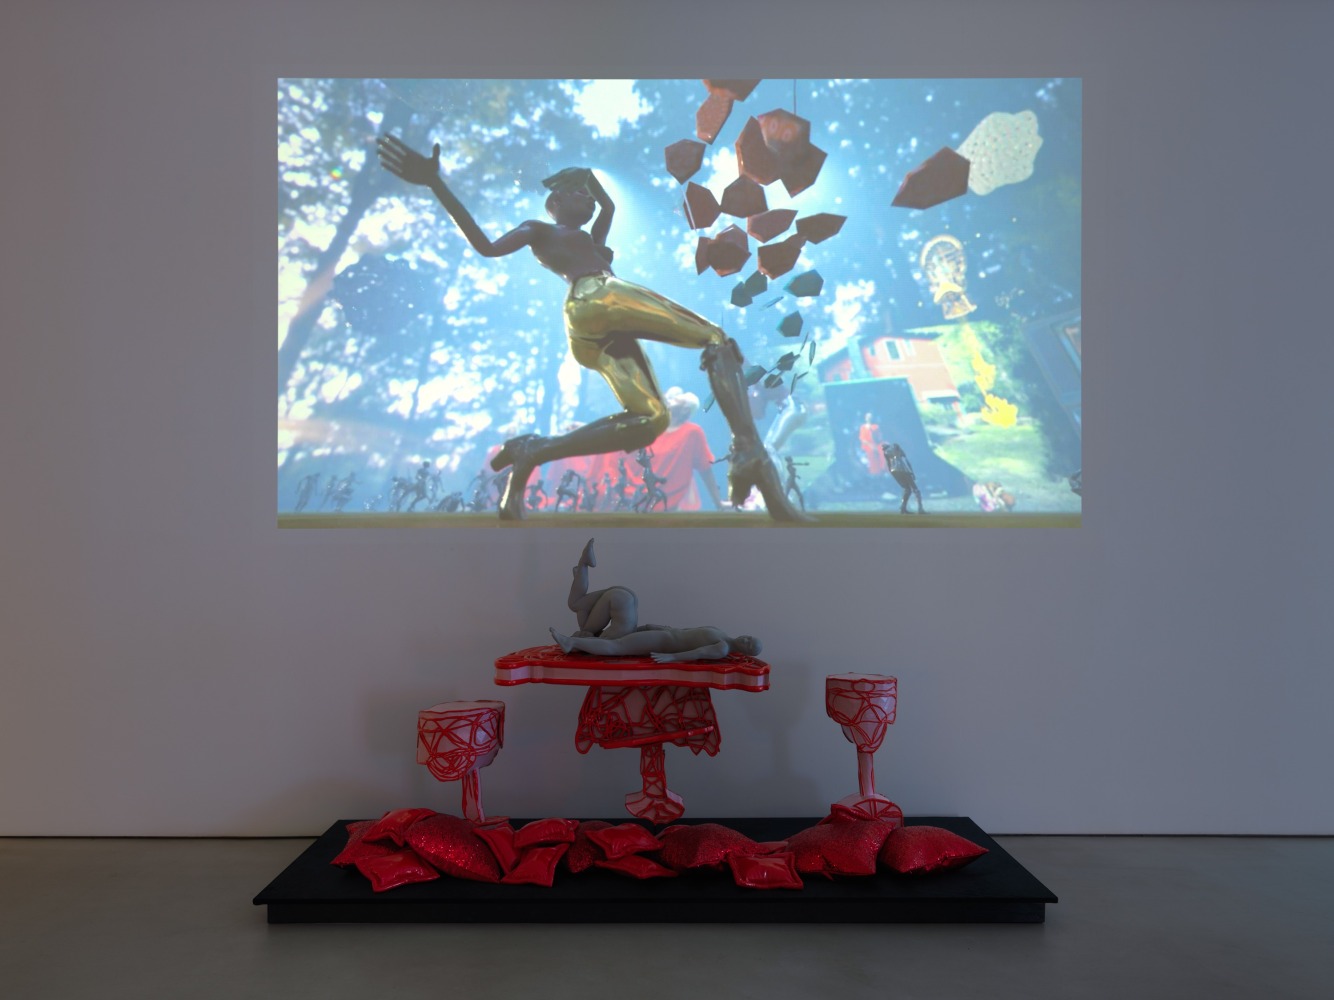 JACOLBY SATTERWHITE&amp;nbsp;

In collaboration with The Fabric Workshop and Museum, Philadelphia&amp;nbsp;

Room for Levitating Beds
2019
PLA filament, epoxy, epoxy resin, spray mount, aluminized glass beads, HD color video, steel, velour, plywood, vinyl, hot glue, foam tubing, wire and poly-fil
48 by 120 by 48 in.&amp;nbsp; 121.9 by 304.8 by 121.9 cm.
MI&amp;amp;N 16438

$65,000